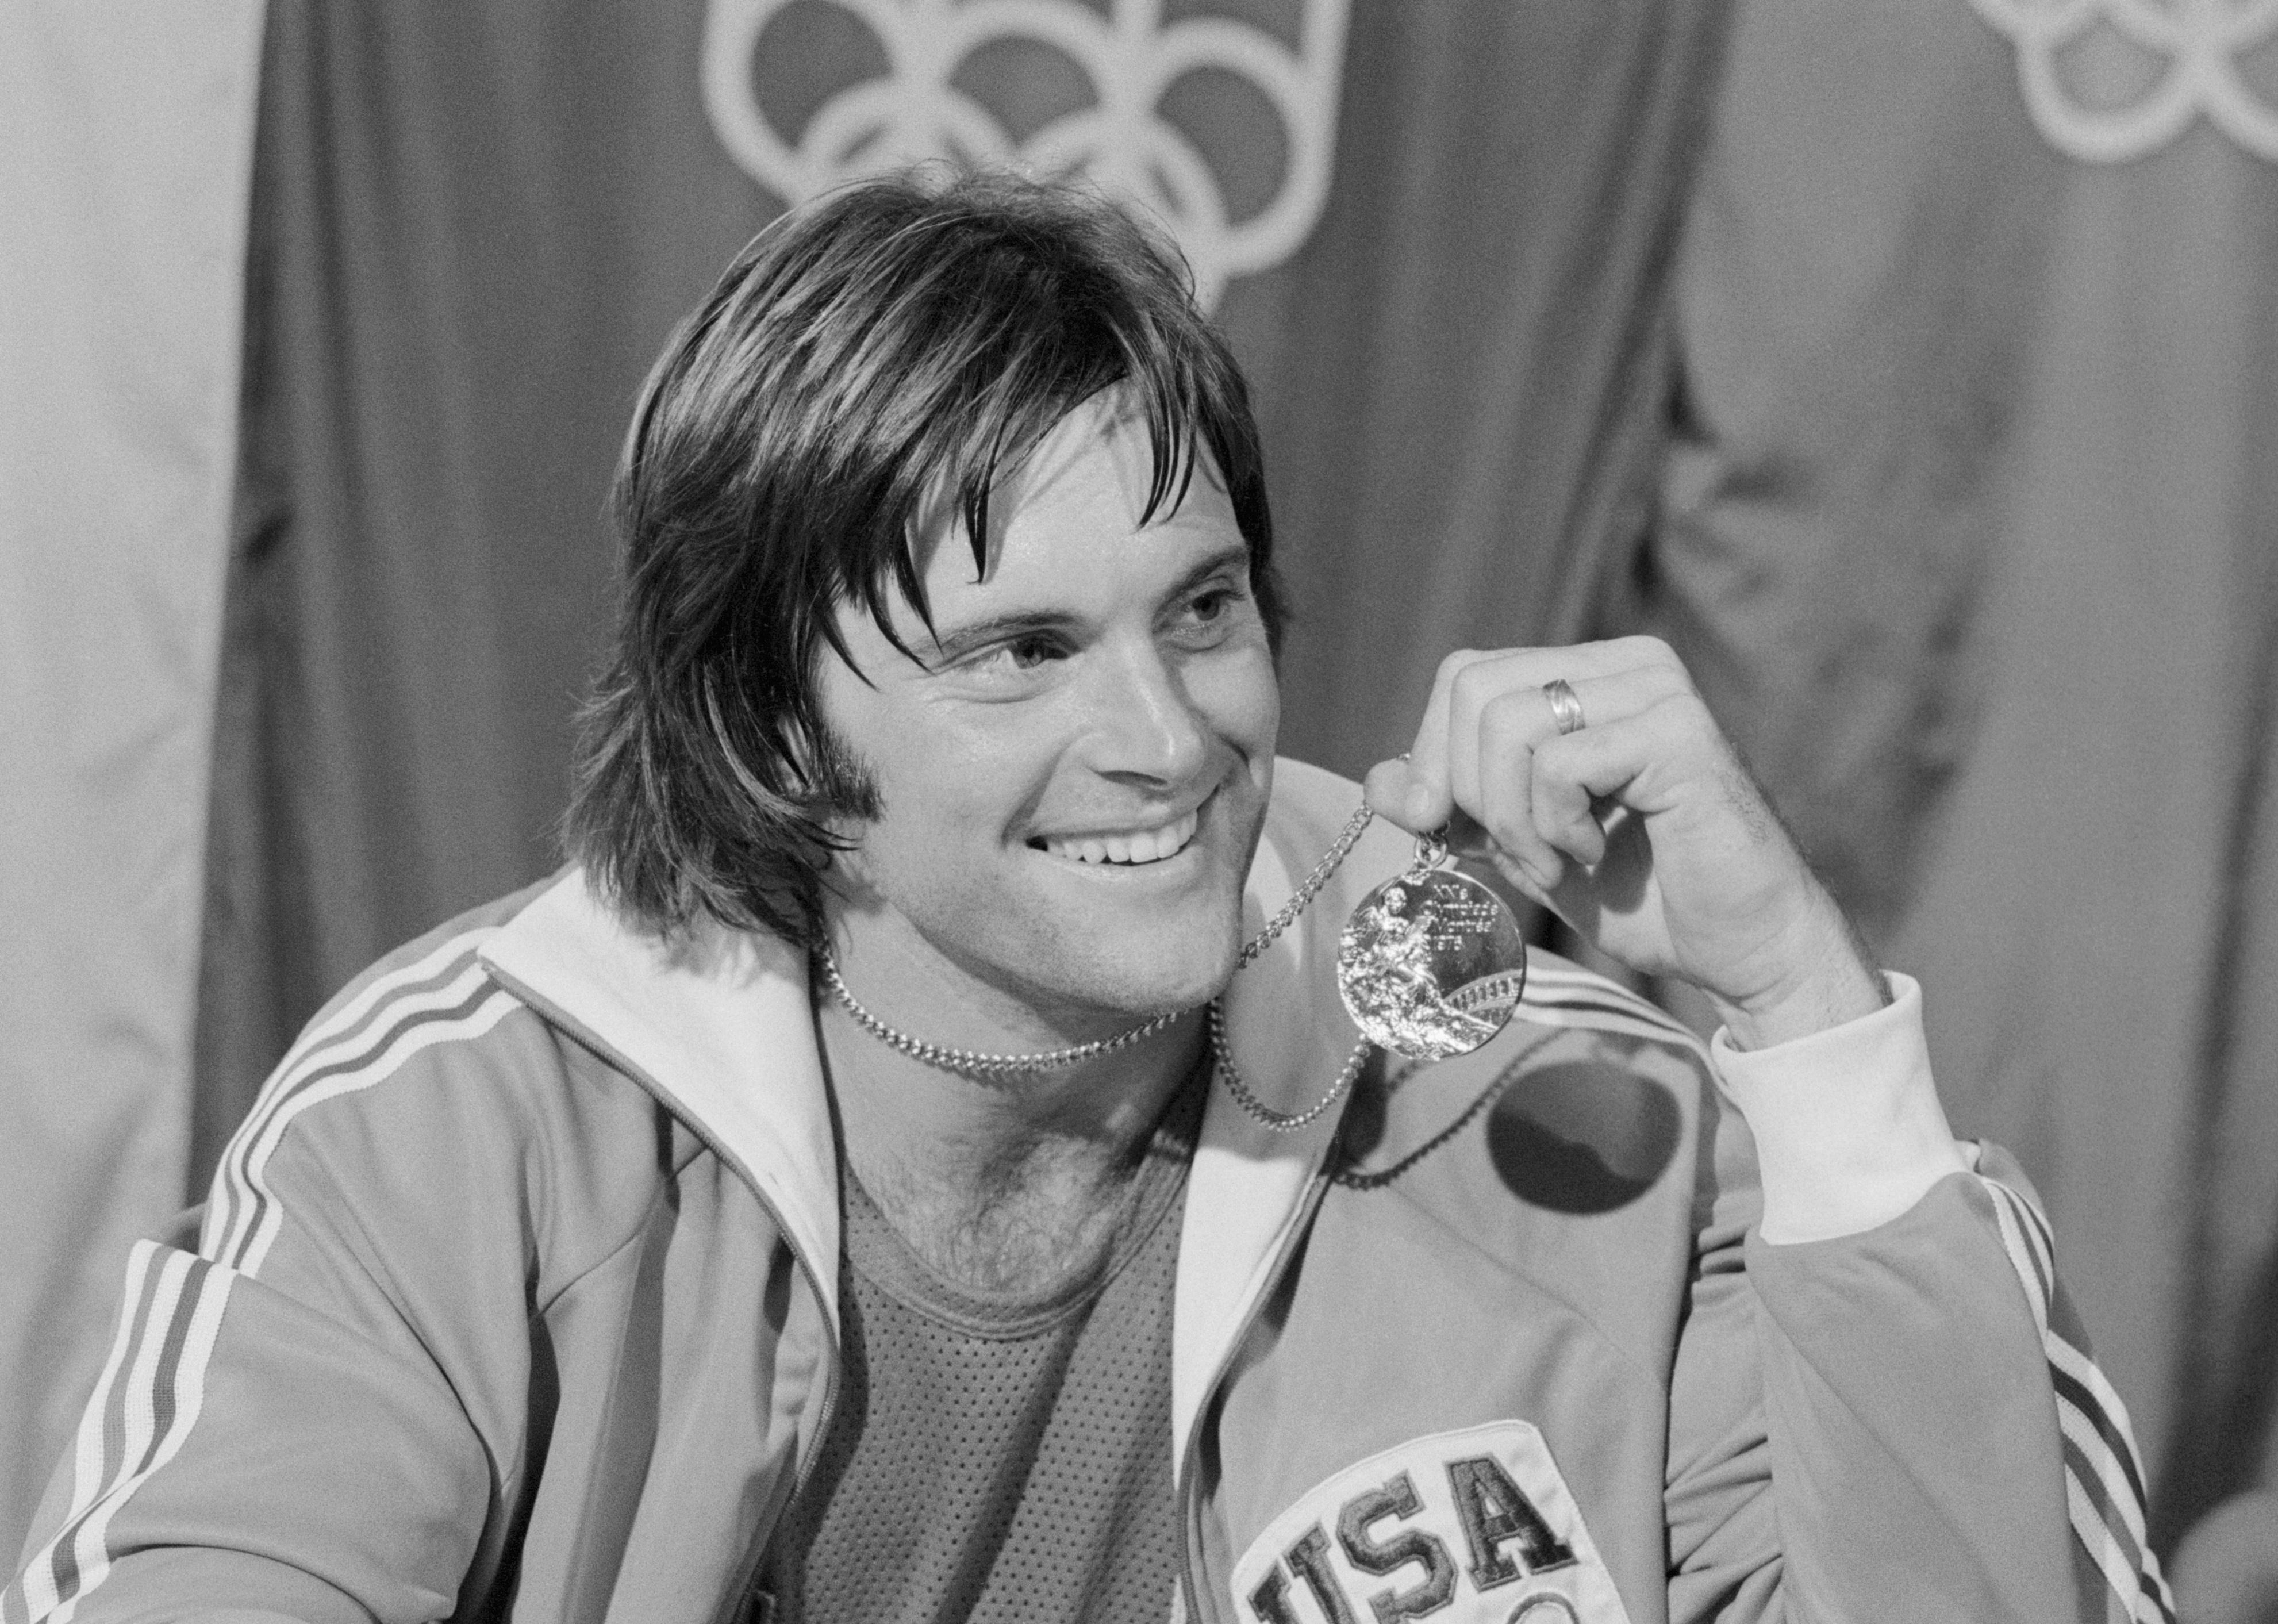 Caitlyn Jenner displays the gold medal won in the Olympic decathlon.